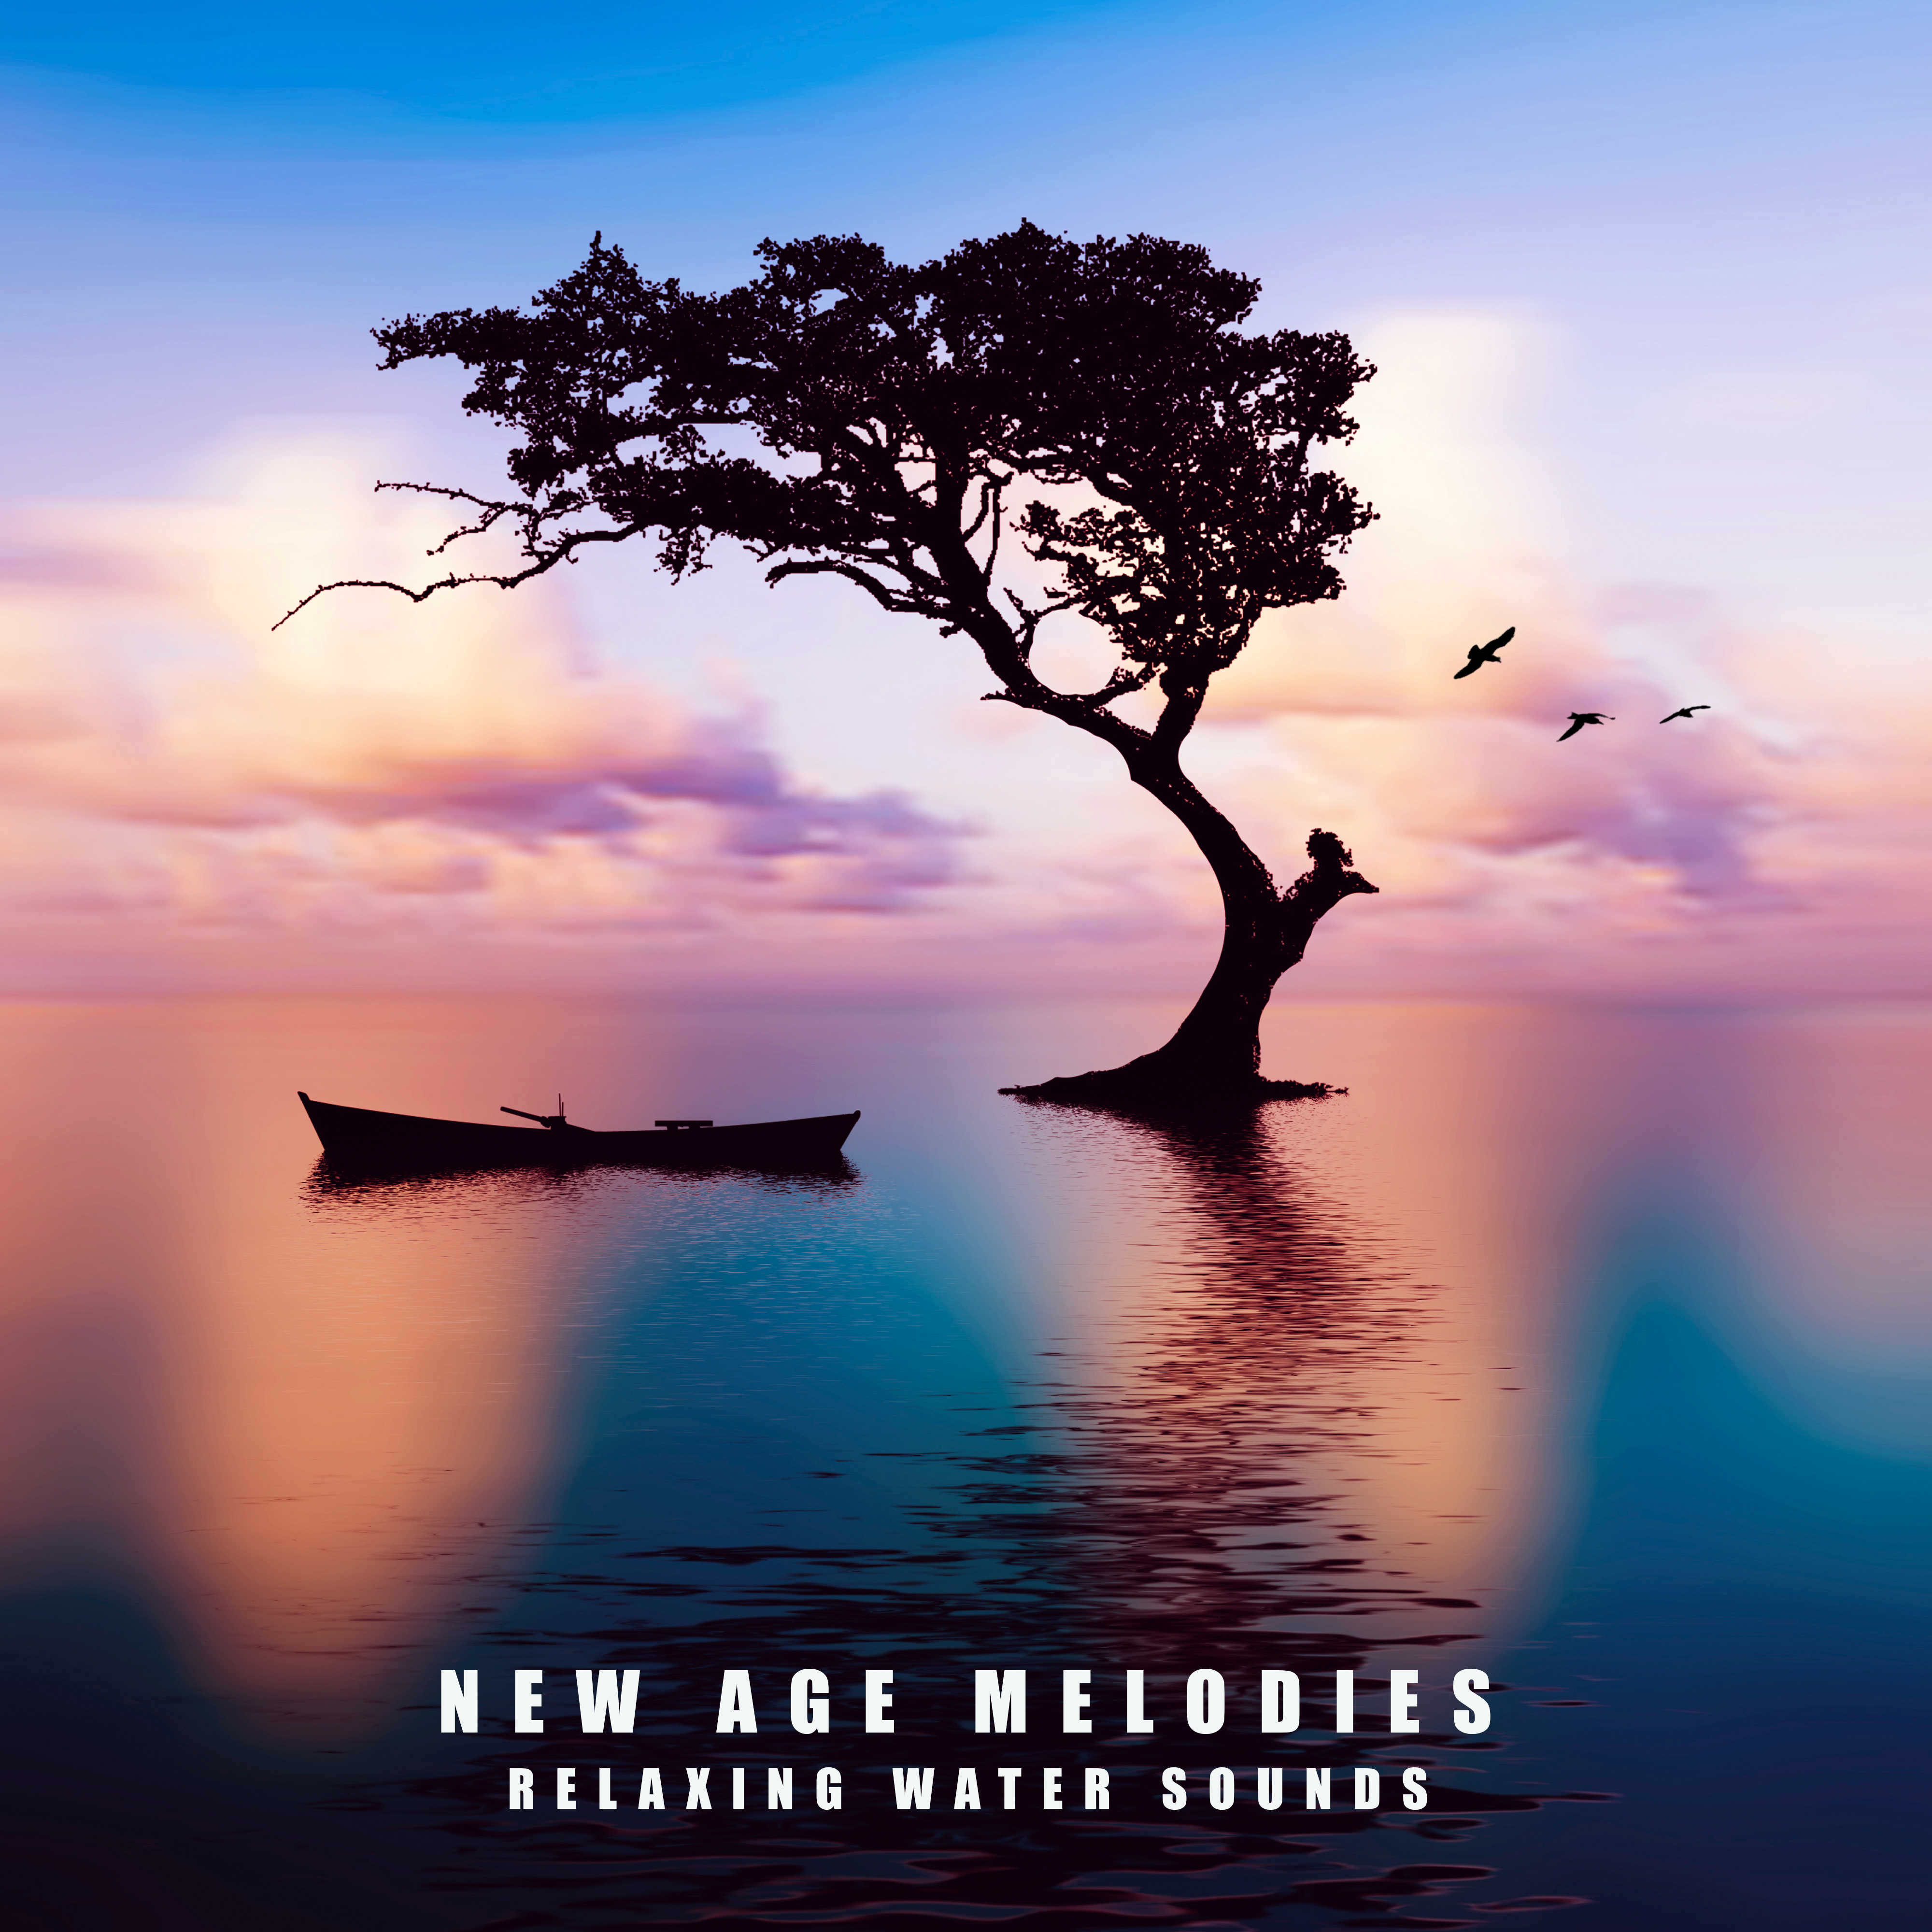 New Age Melodies: Relaxing Water Sounds